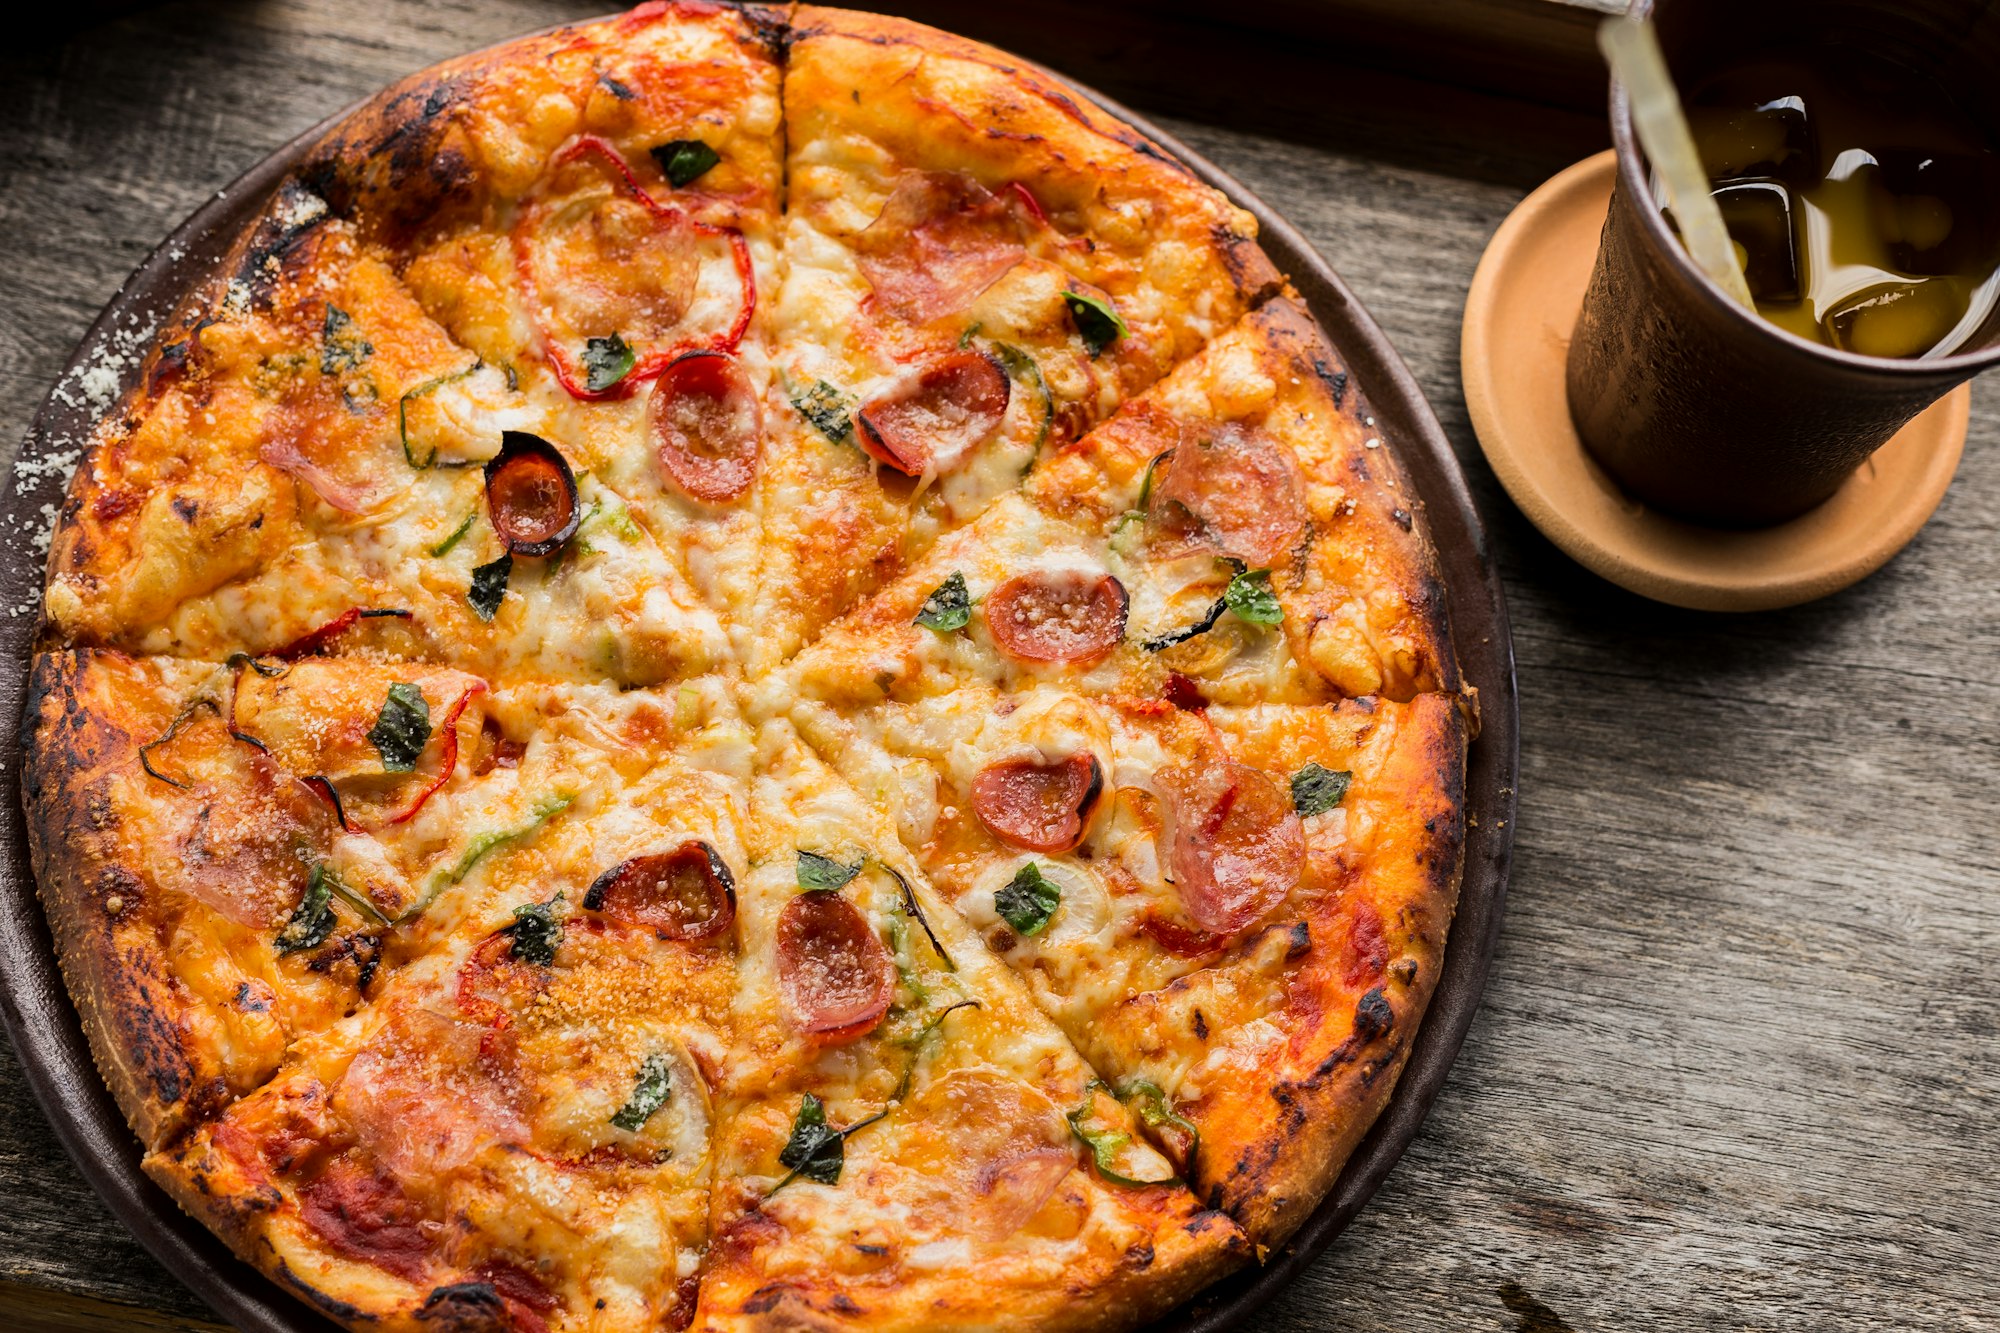 What are the Best Pizza Restaurants in Memphis?